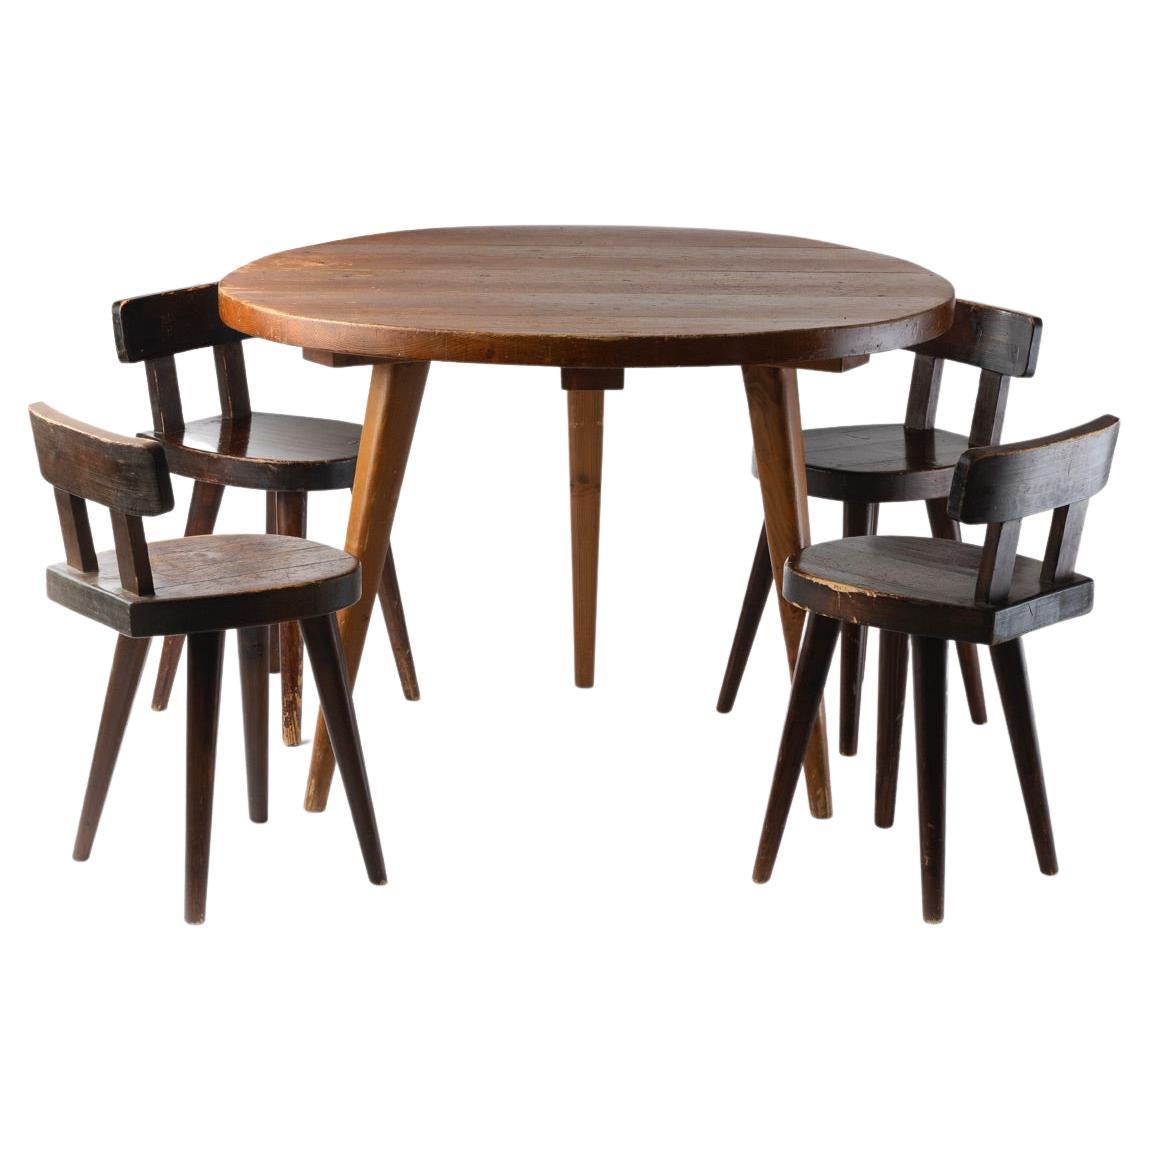 Christian Durupt Meribel Dining Set, Fours Chairs and One Circular Table For Sale